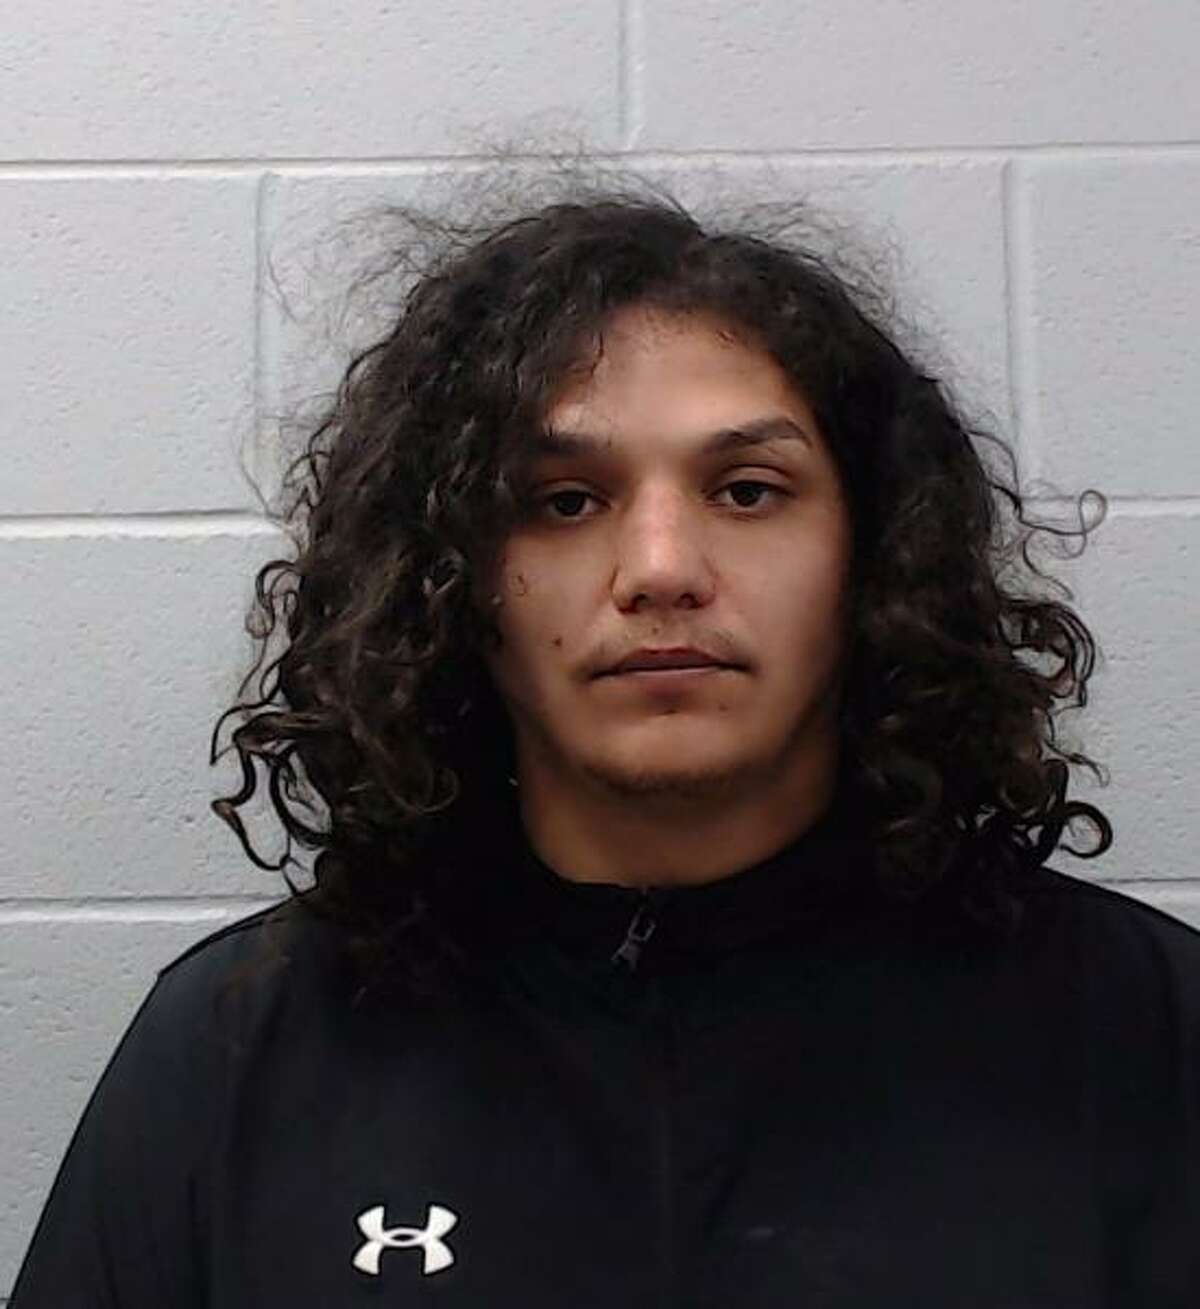 Michael Torres, 25, was charged with murder in connection with the death of Lavonte Craig Benford.